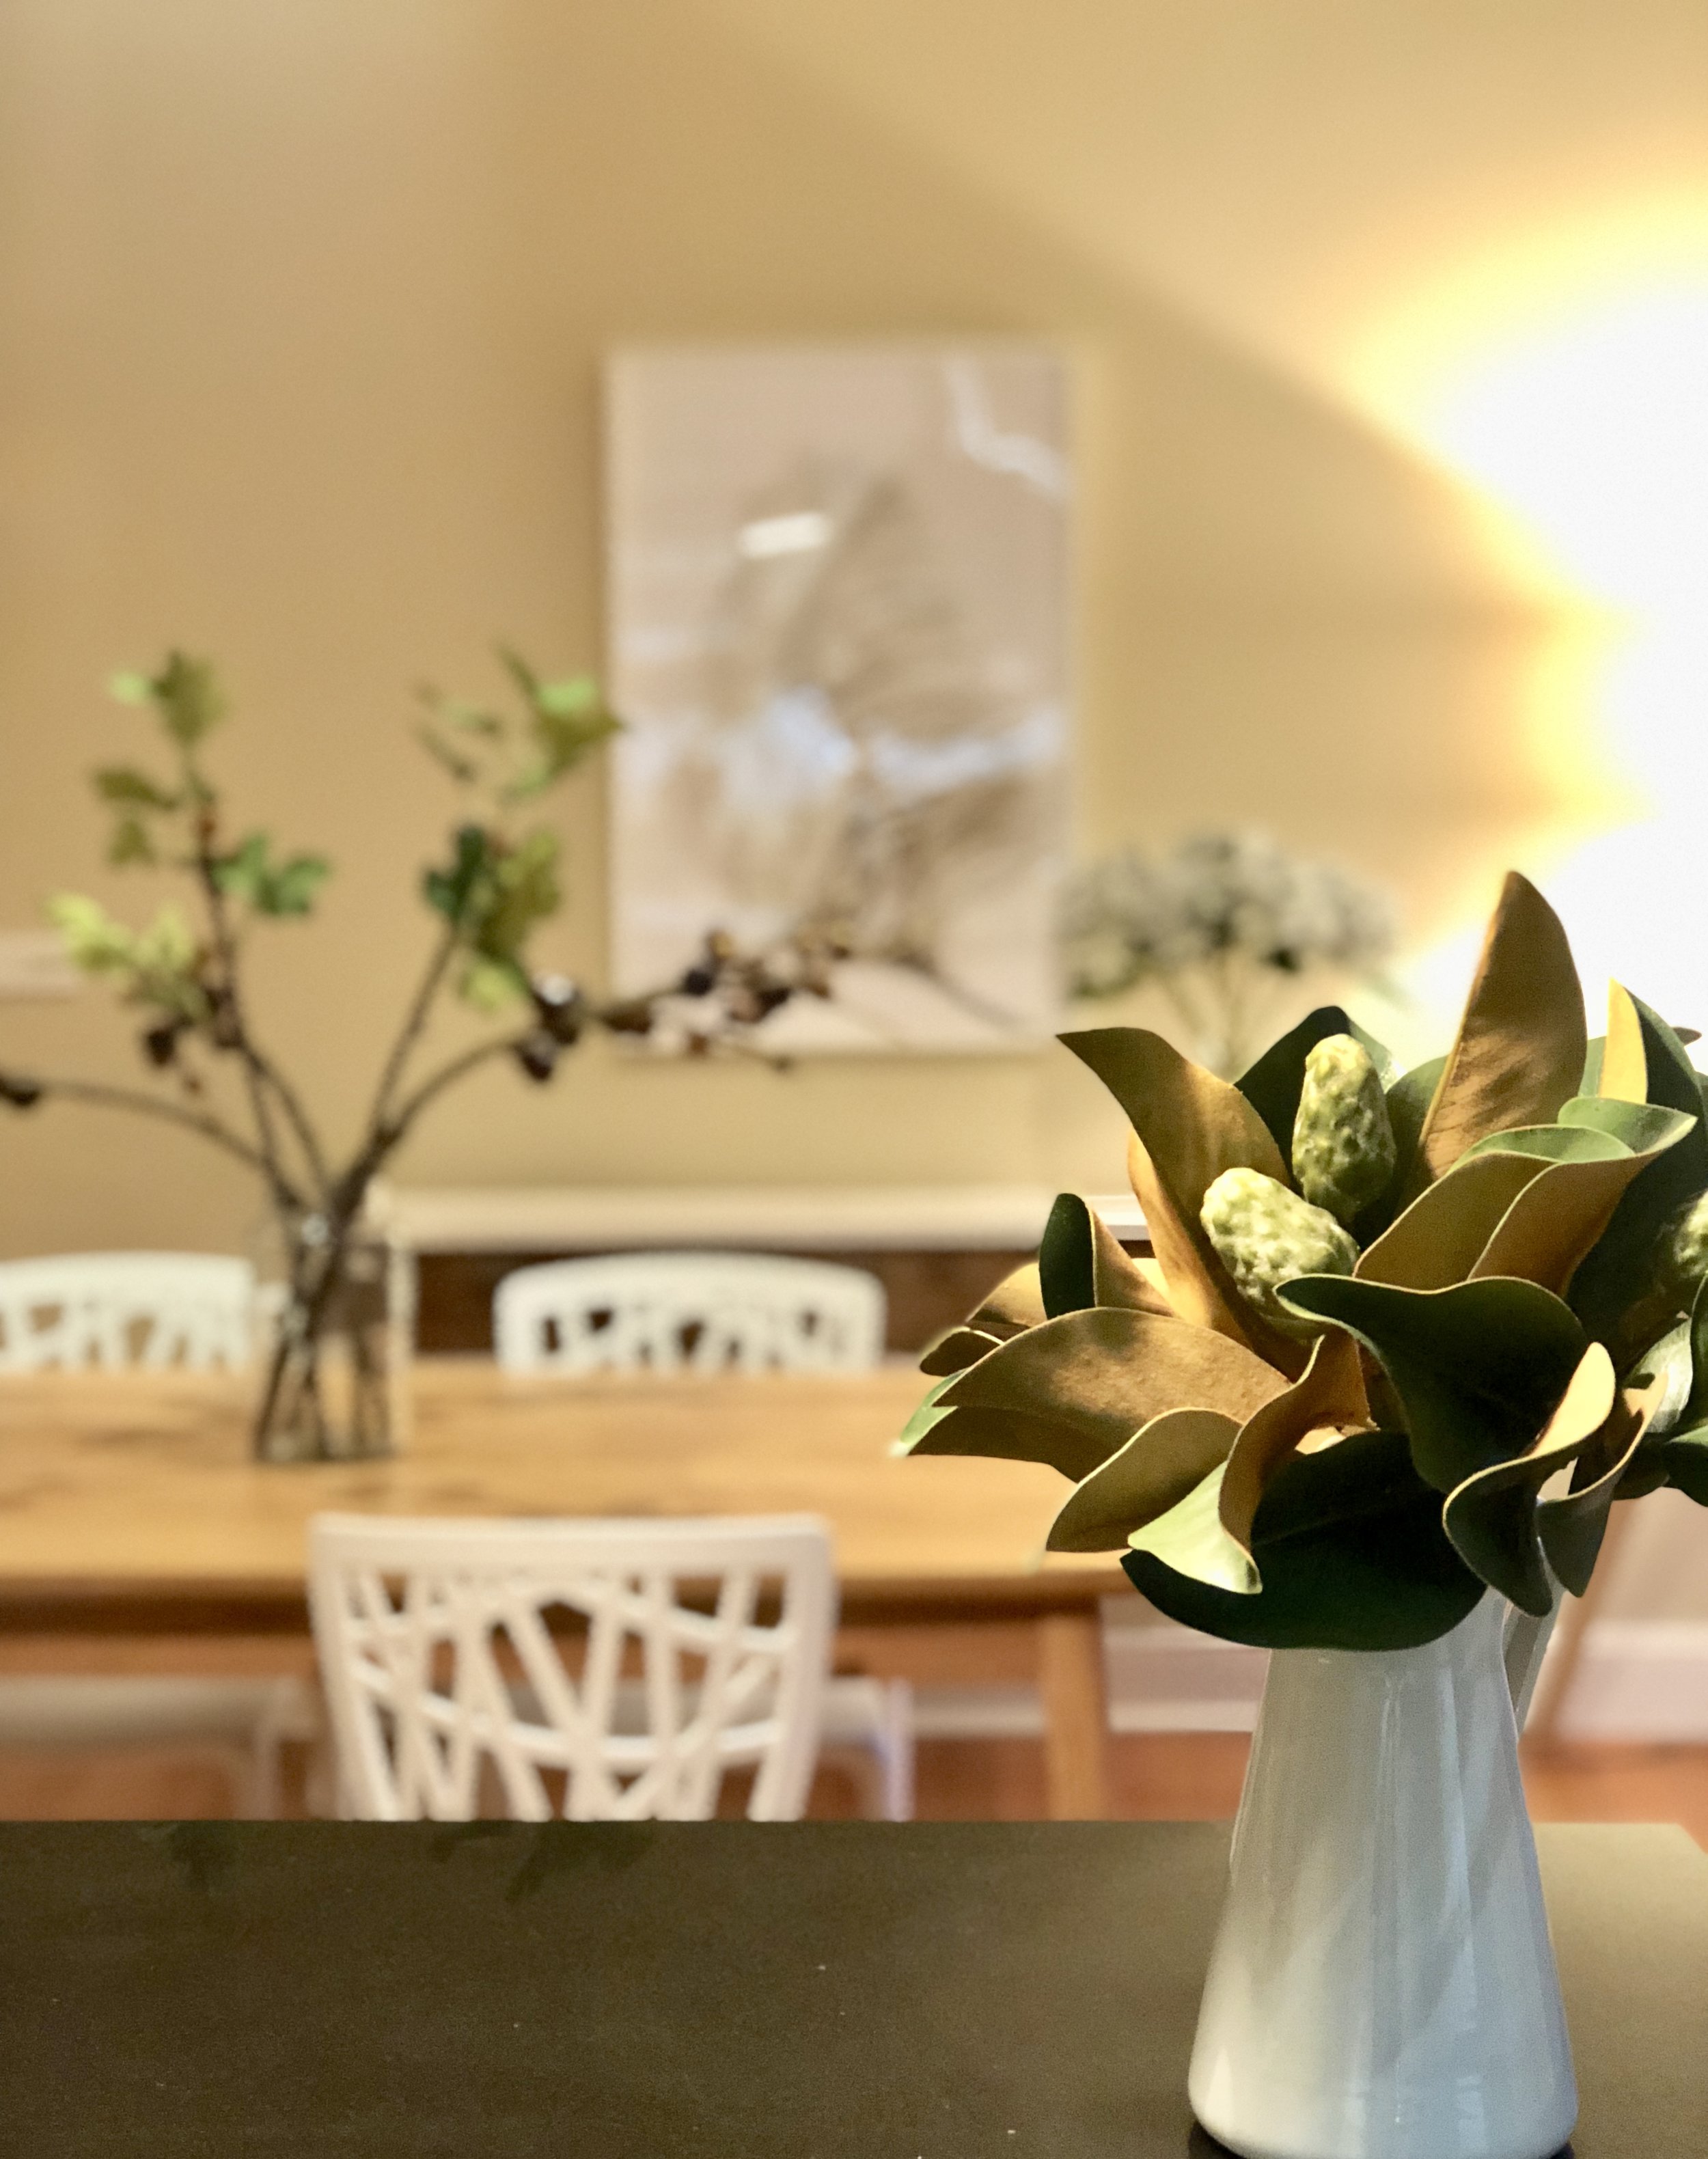 Plants for Home Staging - Fake or Real? — Right at Home Staging